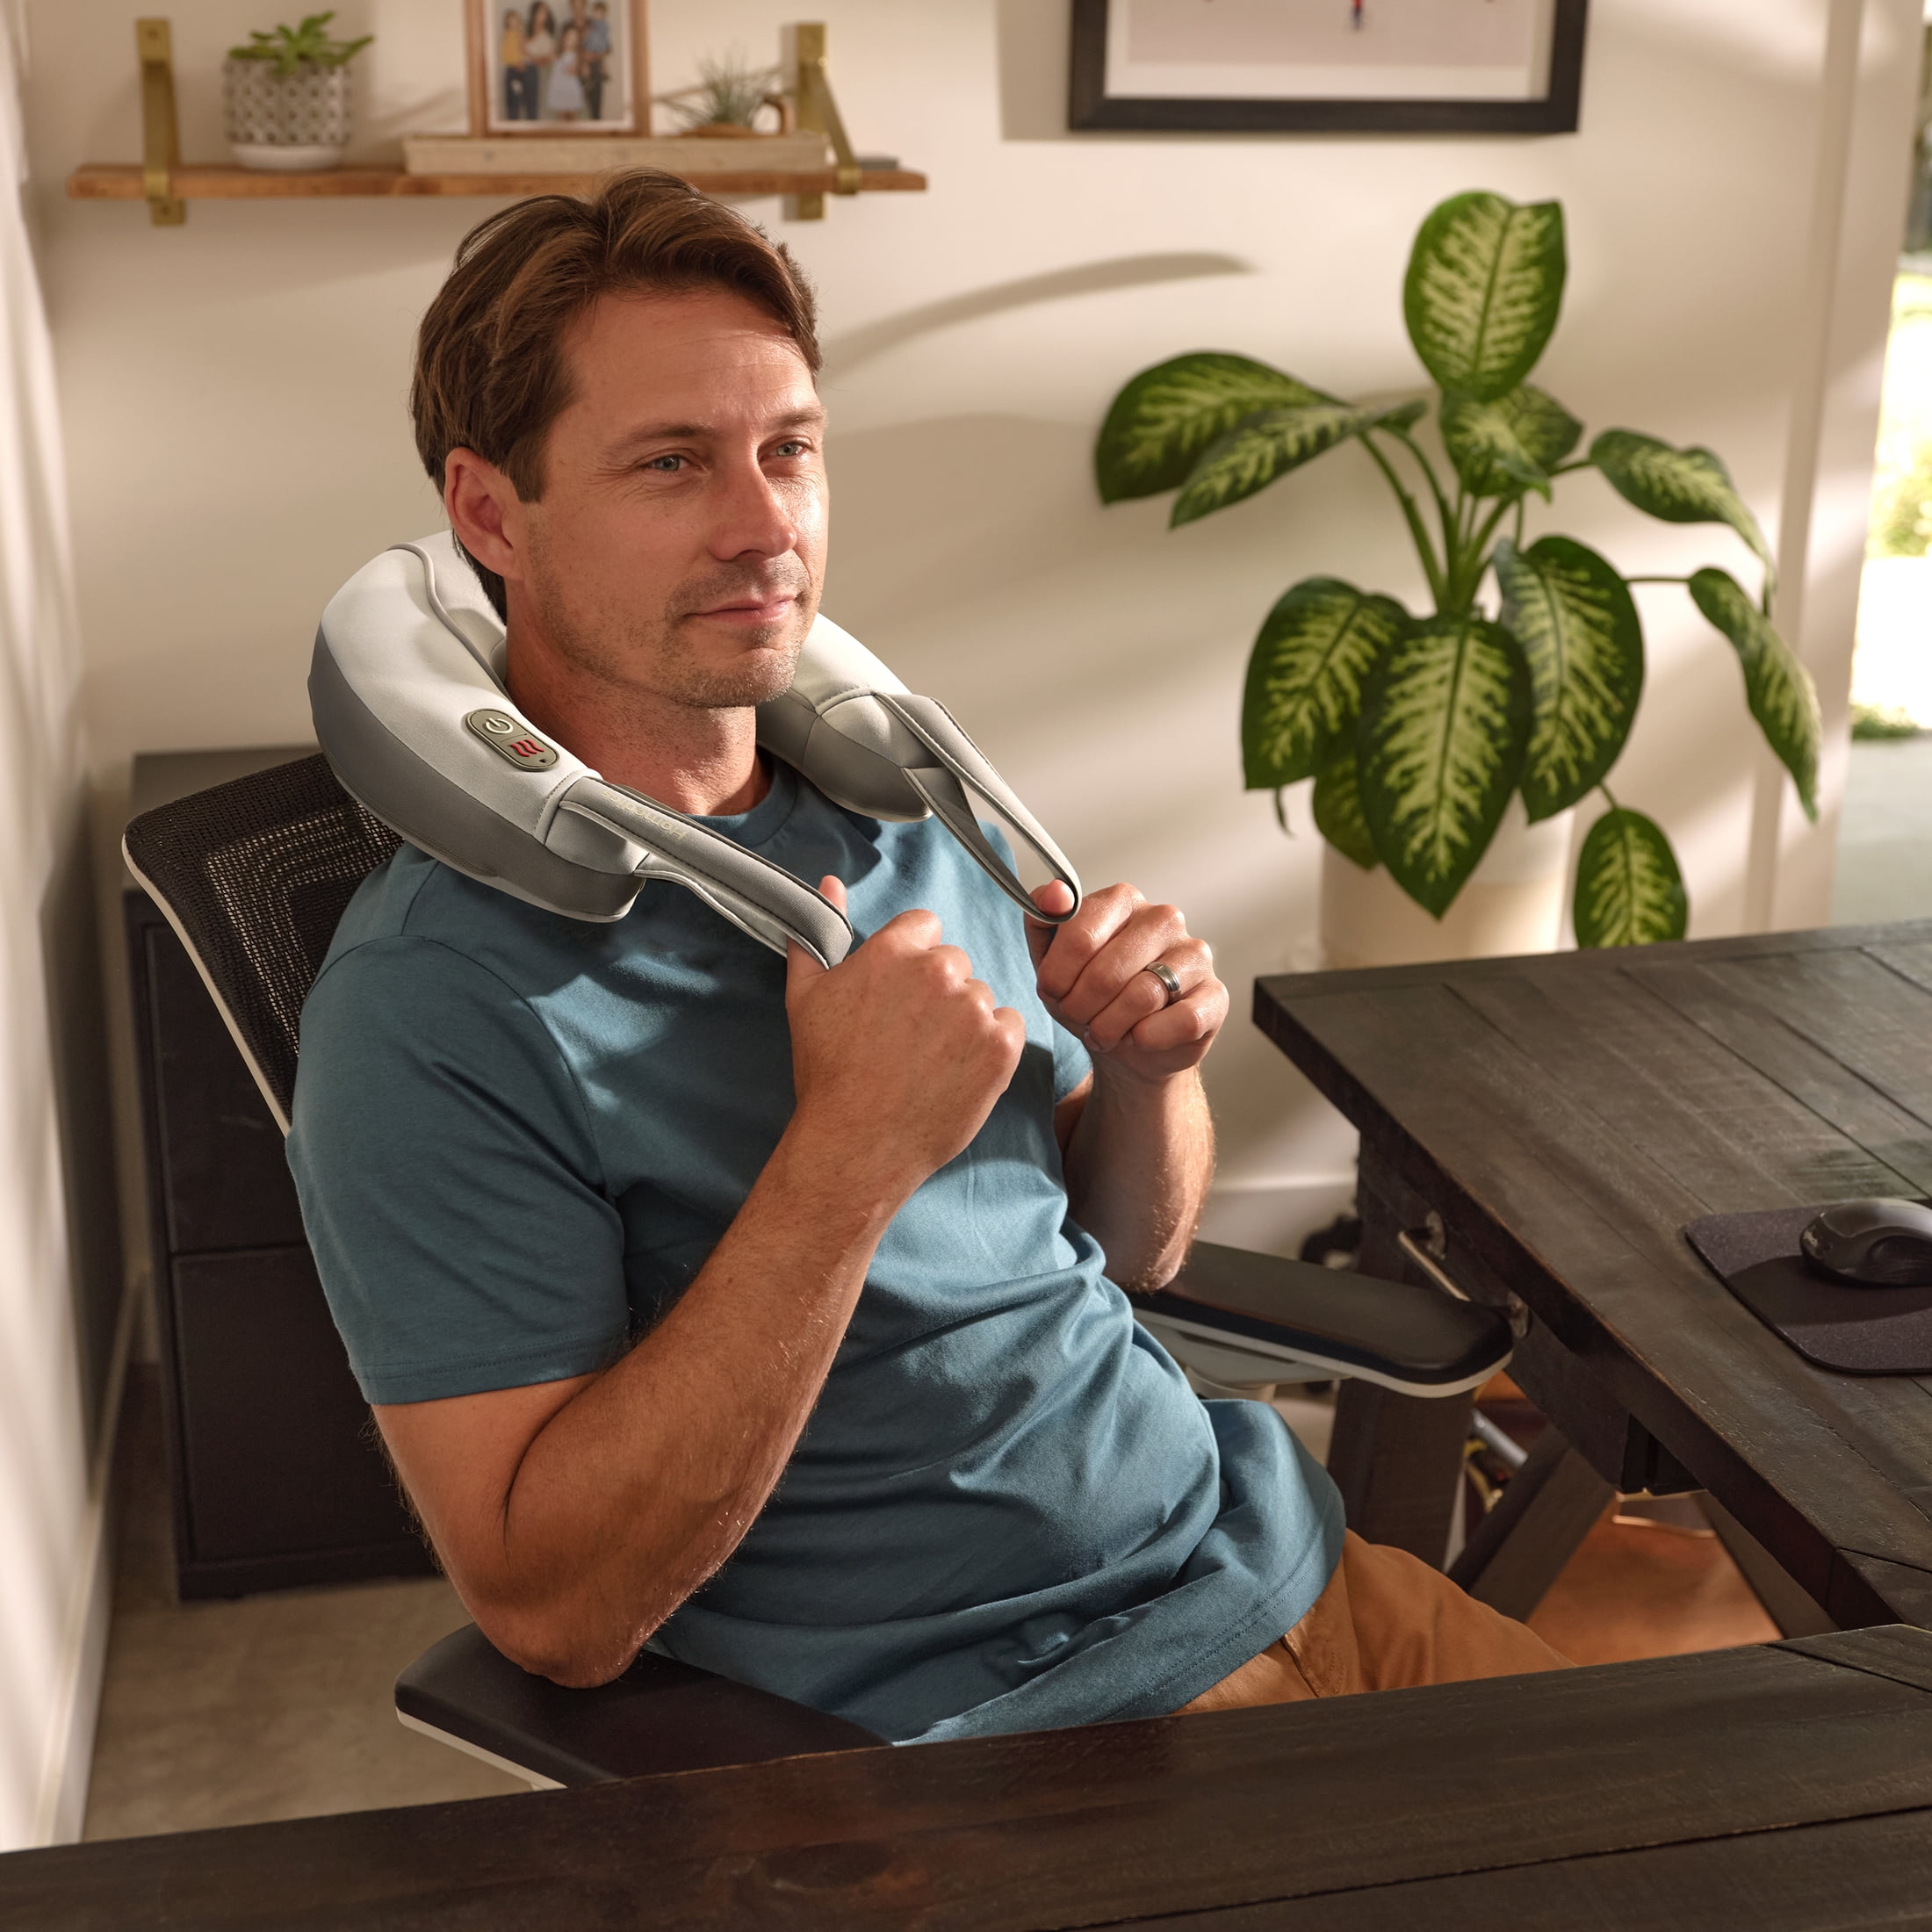 Homedics Pro Therapy Vibration Neck Massager with Soothing Heat